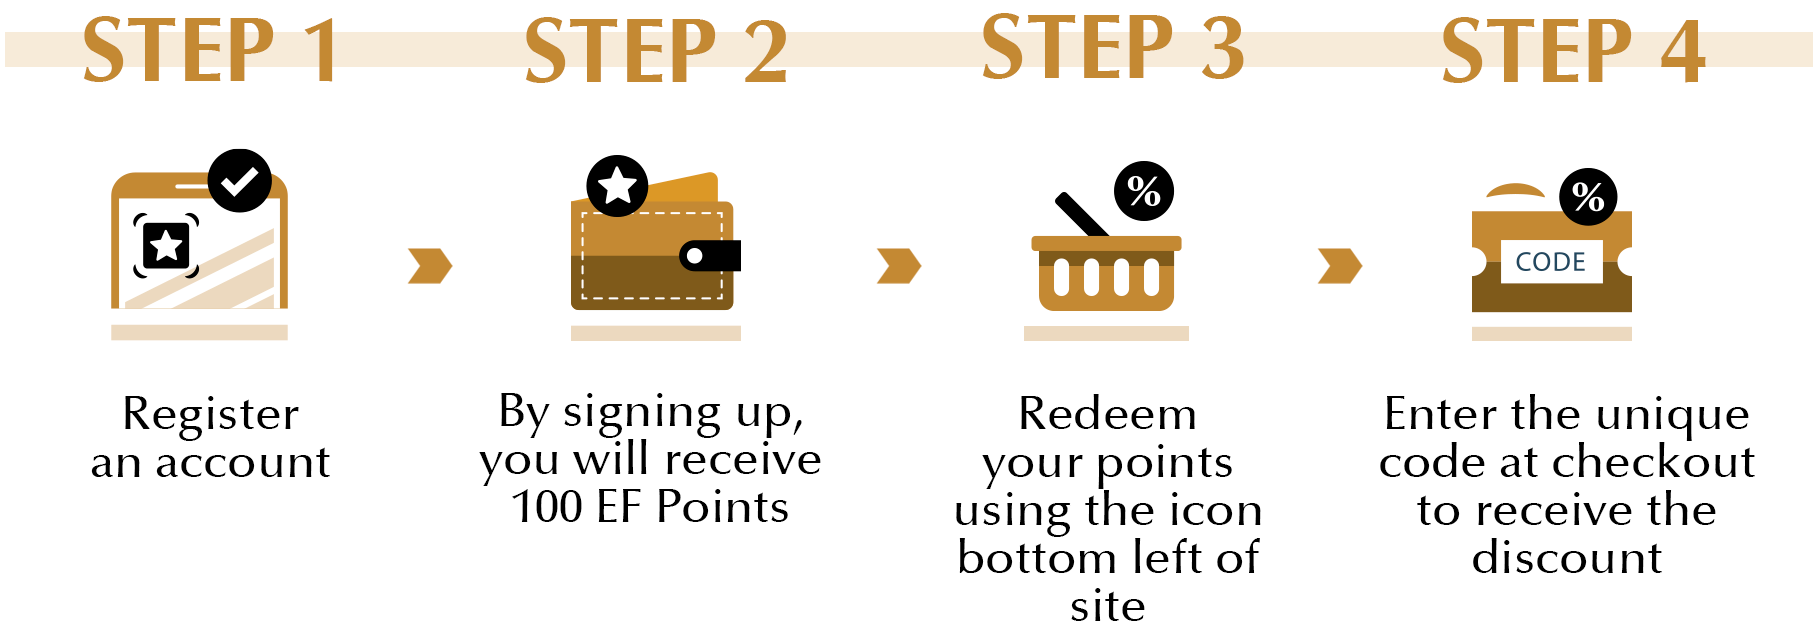 VIP Rewards - Steps to receiving points